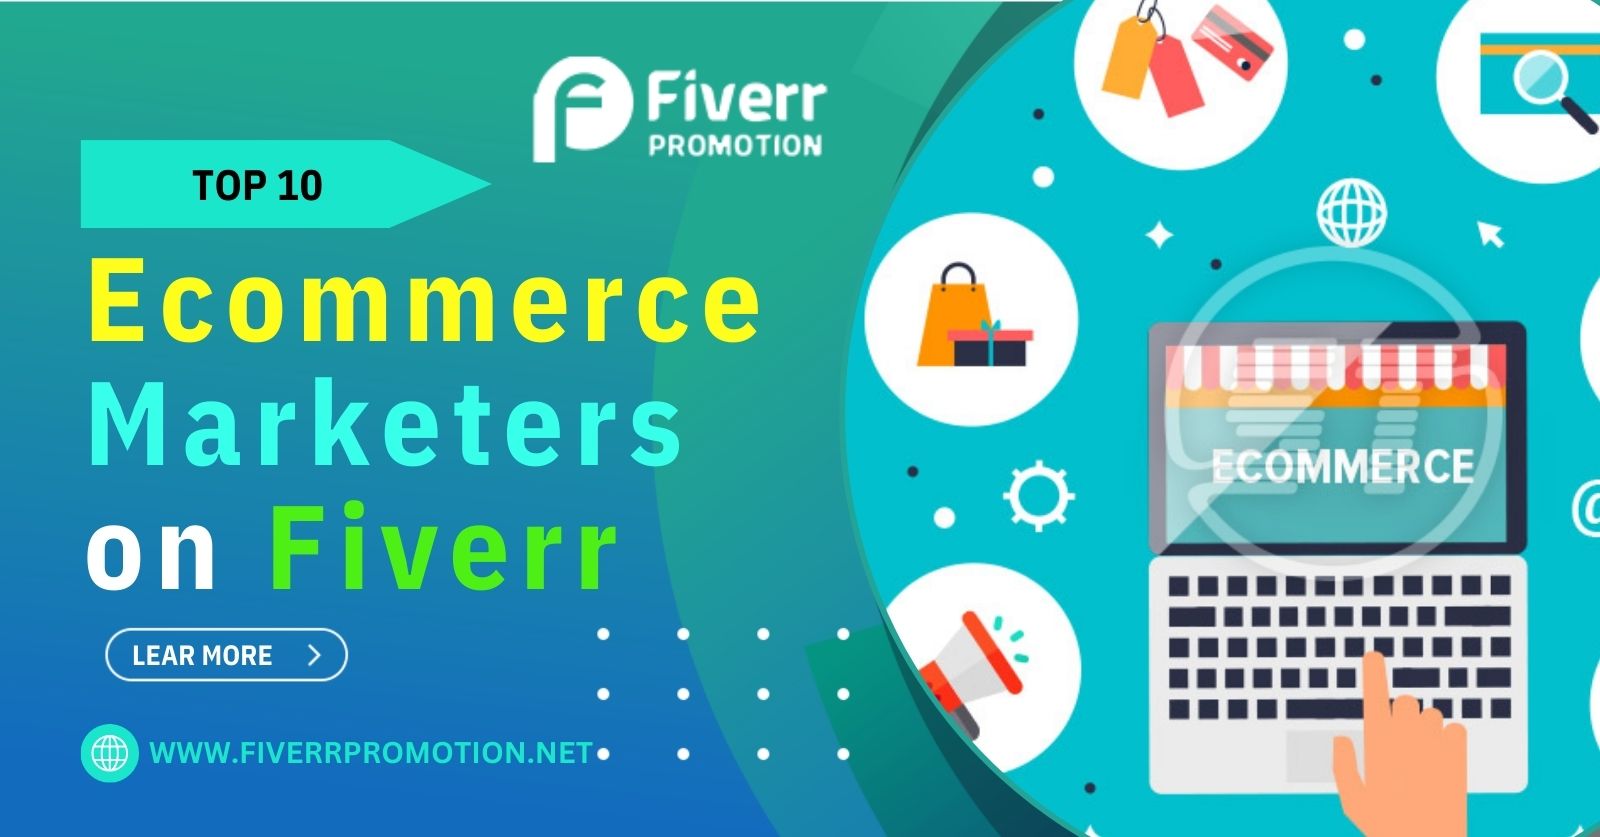 Top 10 Ecommerce Marketers on Fiverr